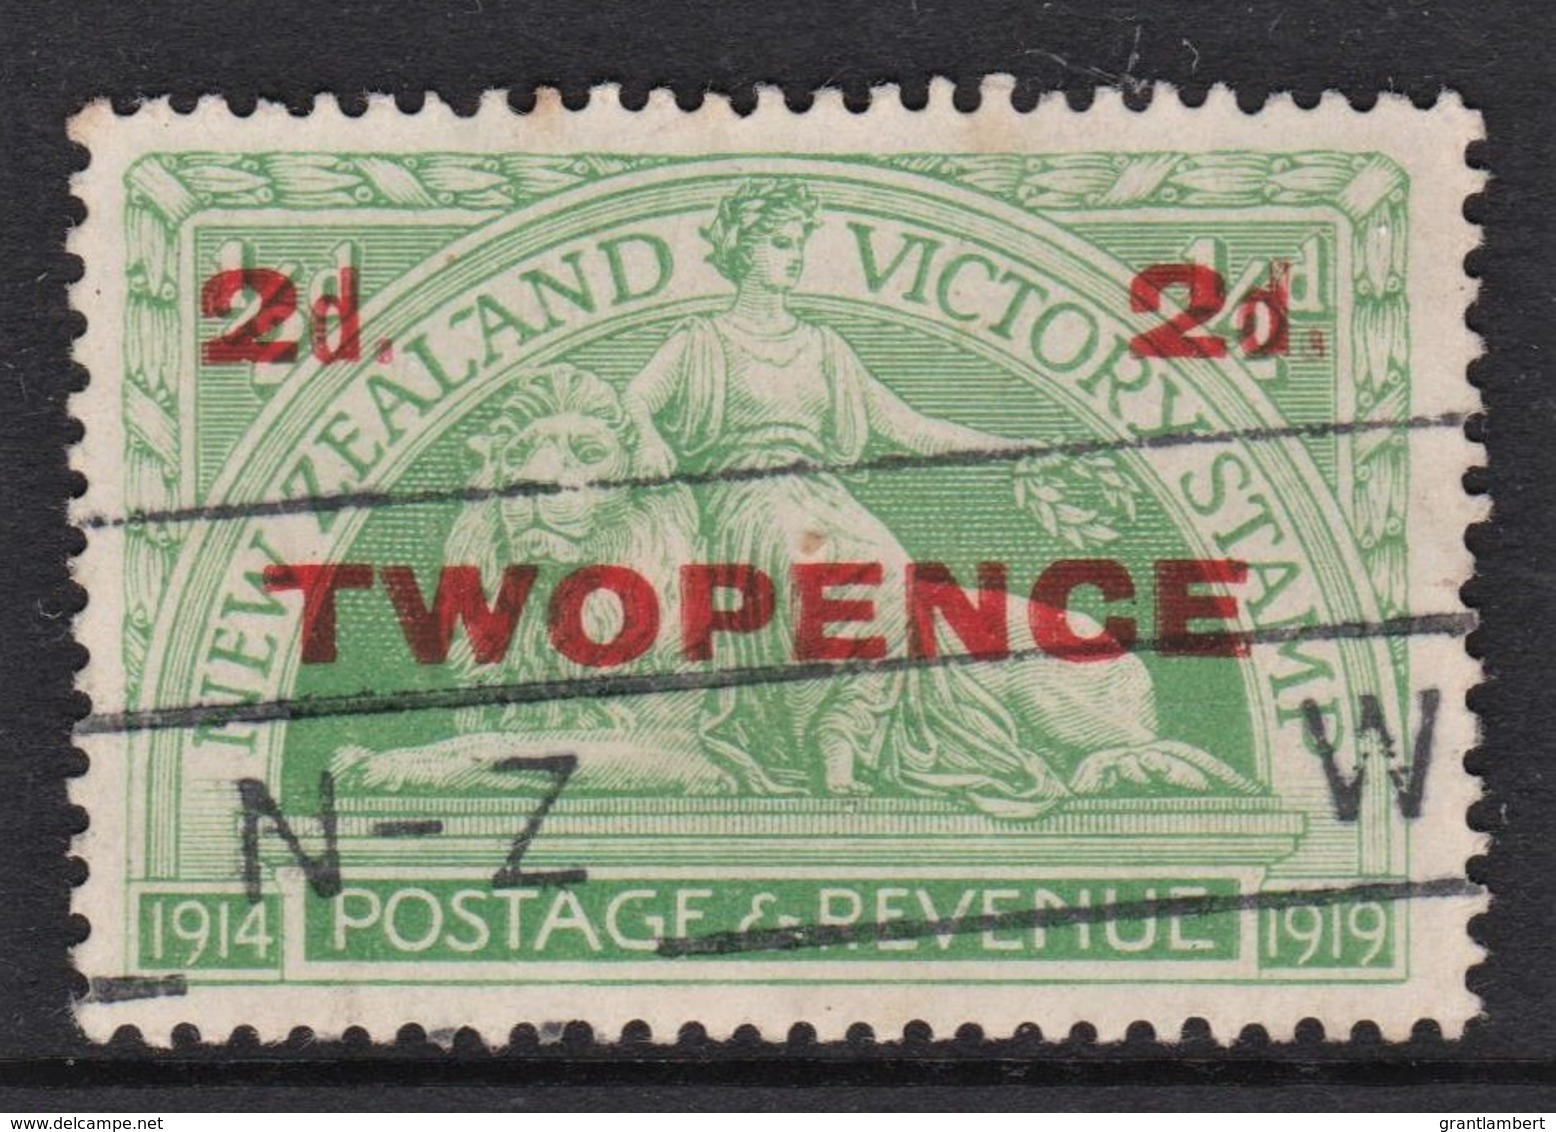 New Zealand 1922 Victory TWO PENCE Overprint Used  SG 459 - Gebraucht